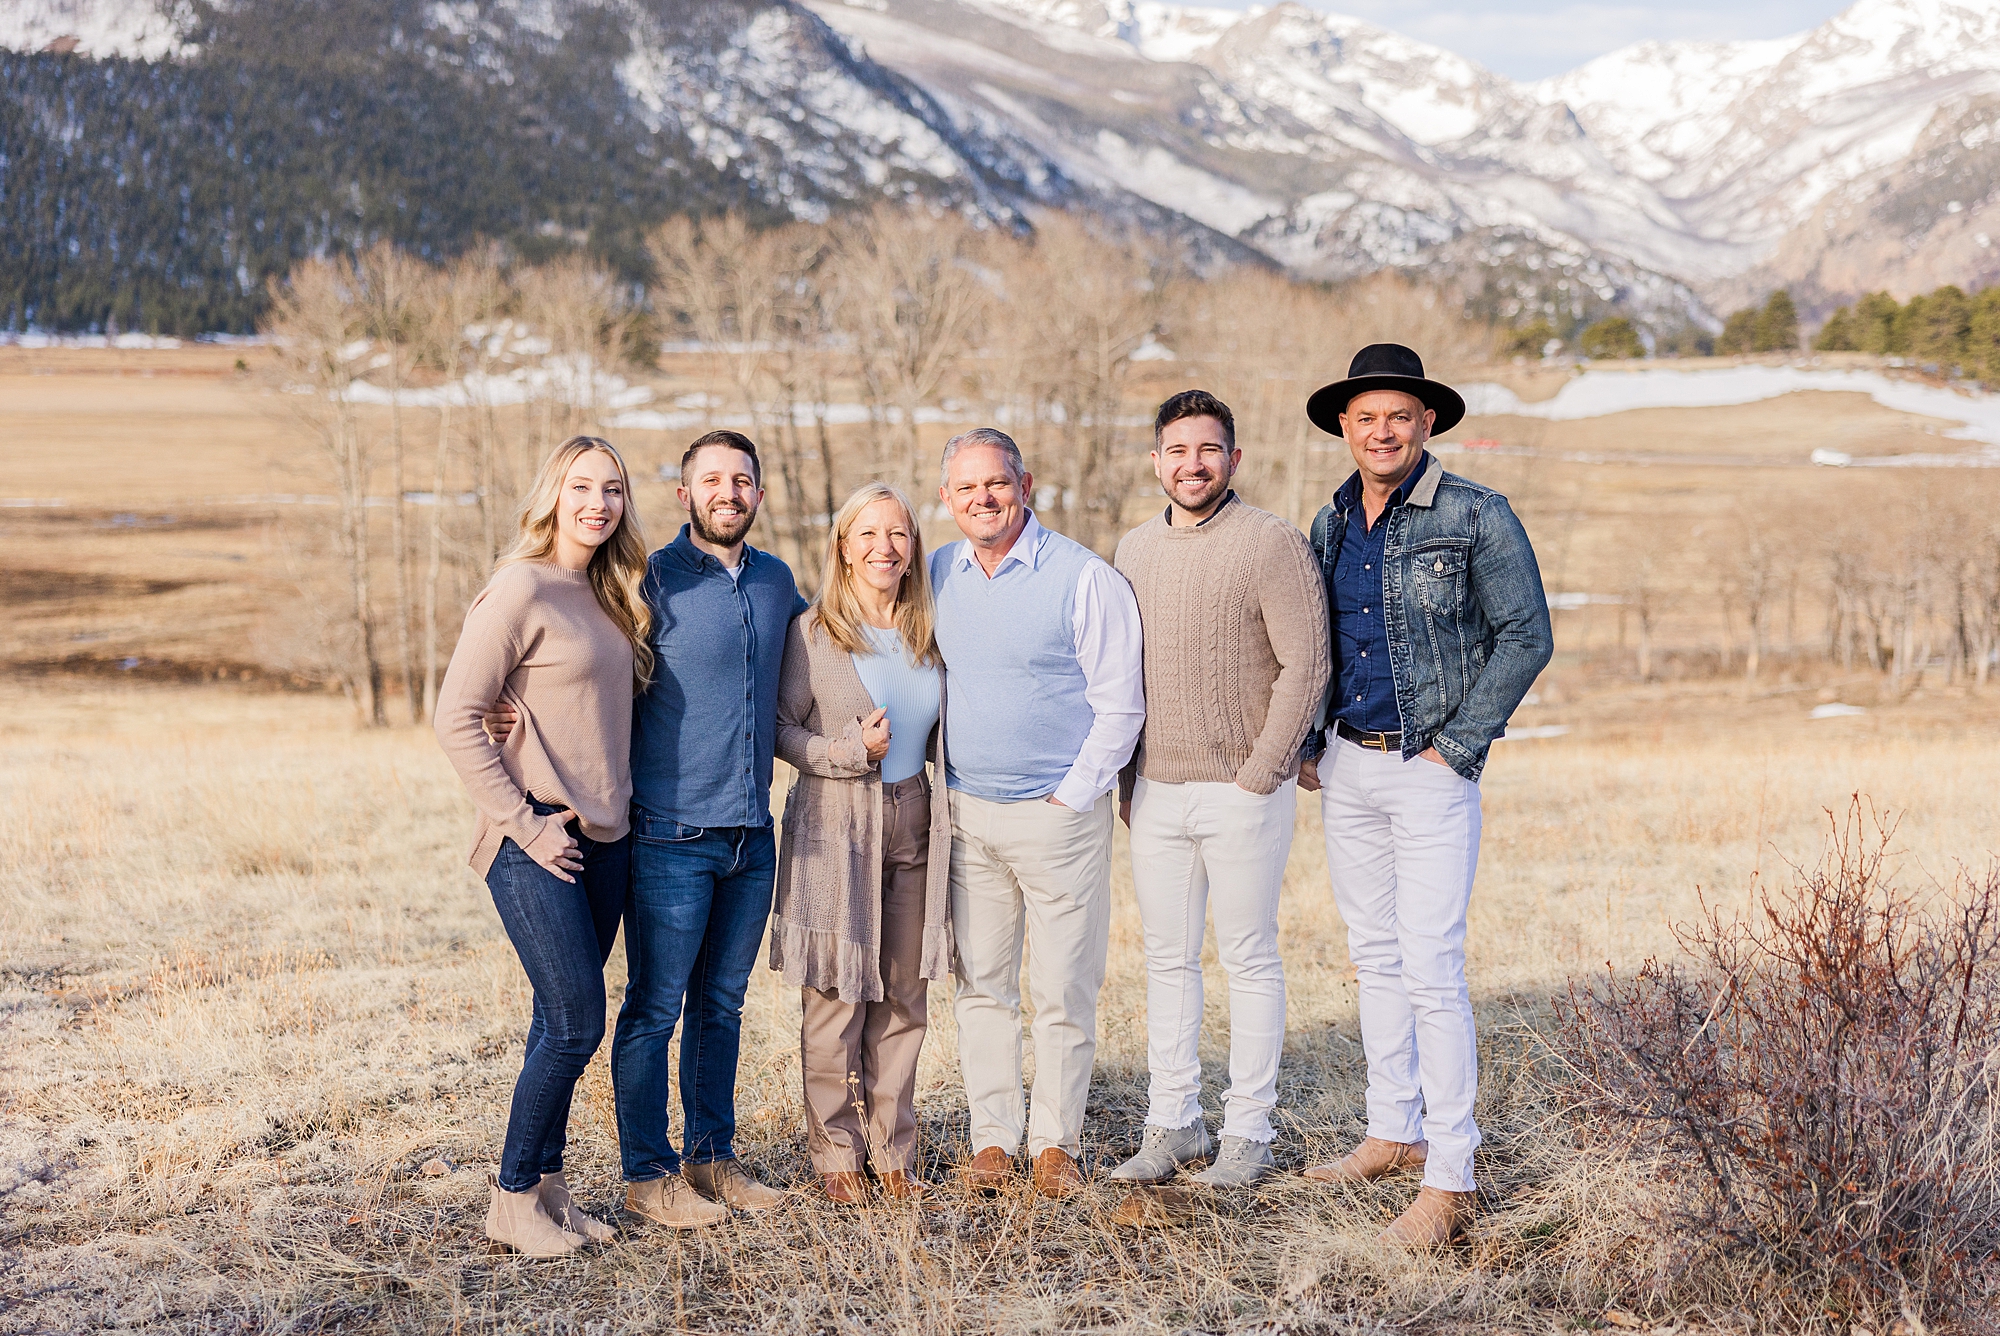 extended family session at Moraine Park in Rocky Mountain National Park